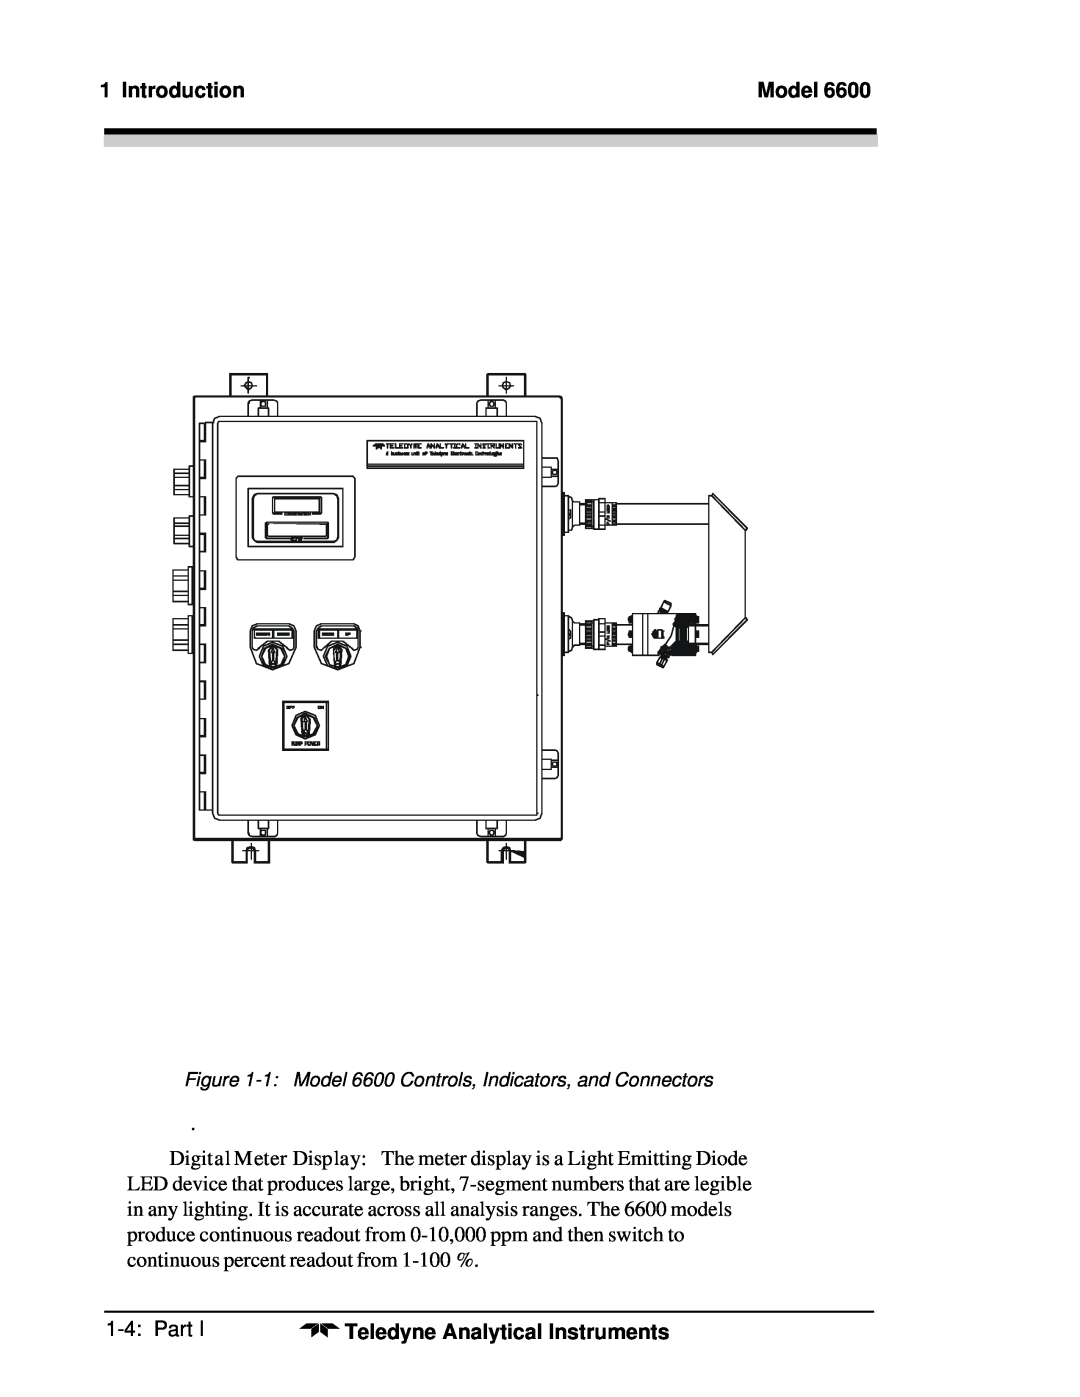 Teledyne 6600 manual Introduction, Model, 1-4:Part, Teledyne Analytical Instruments 